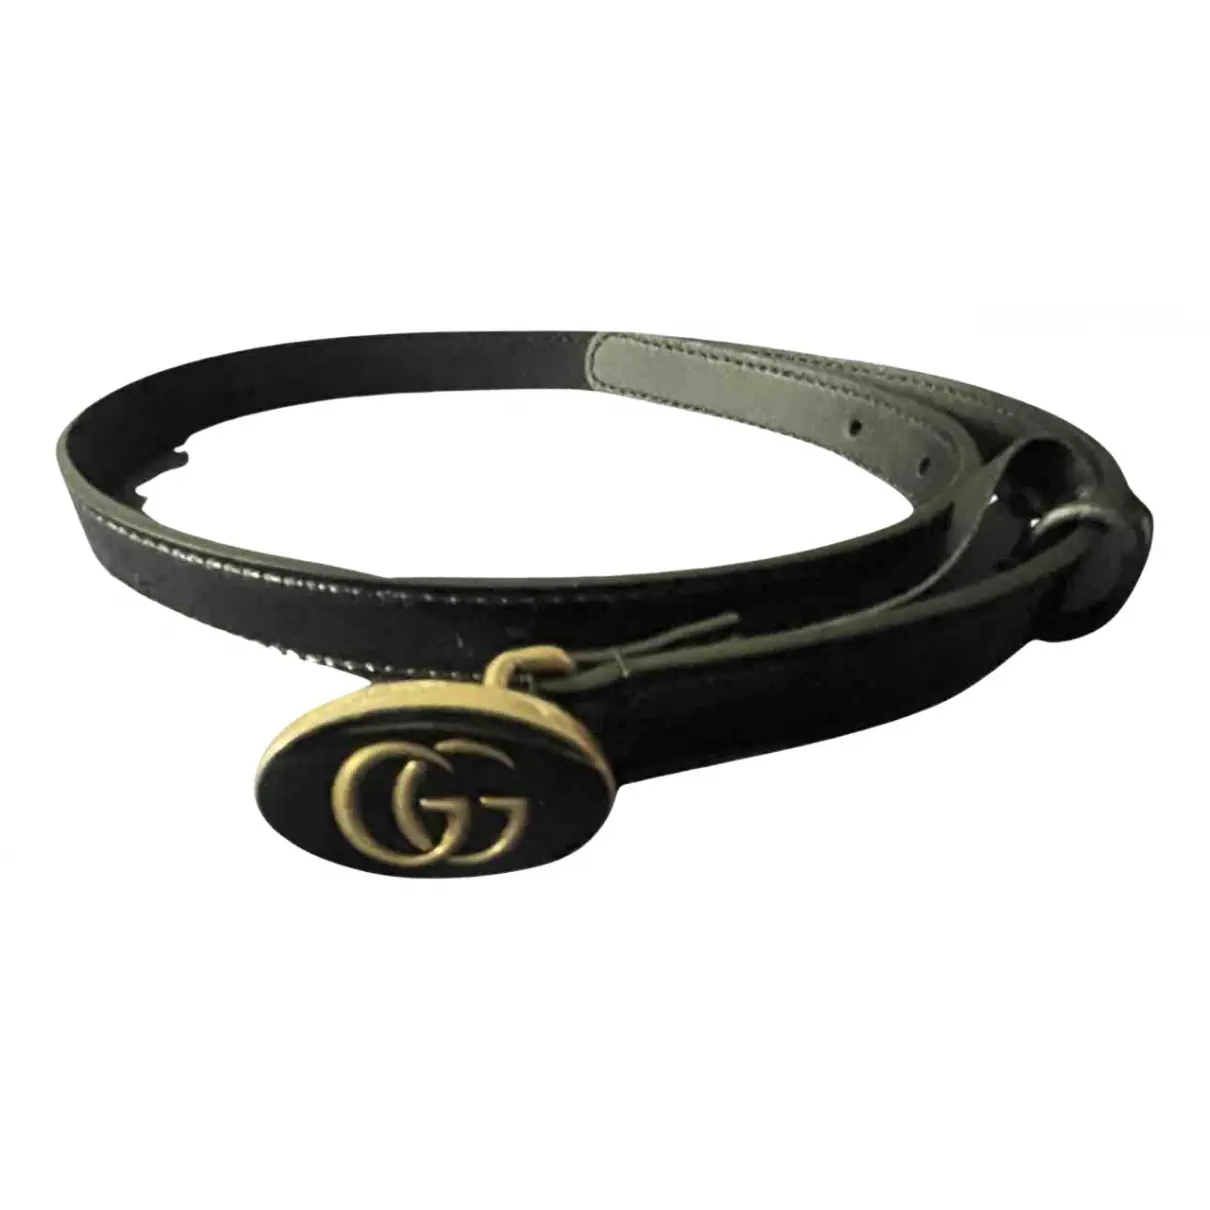 GG Buckle patent leather belt Gucci